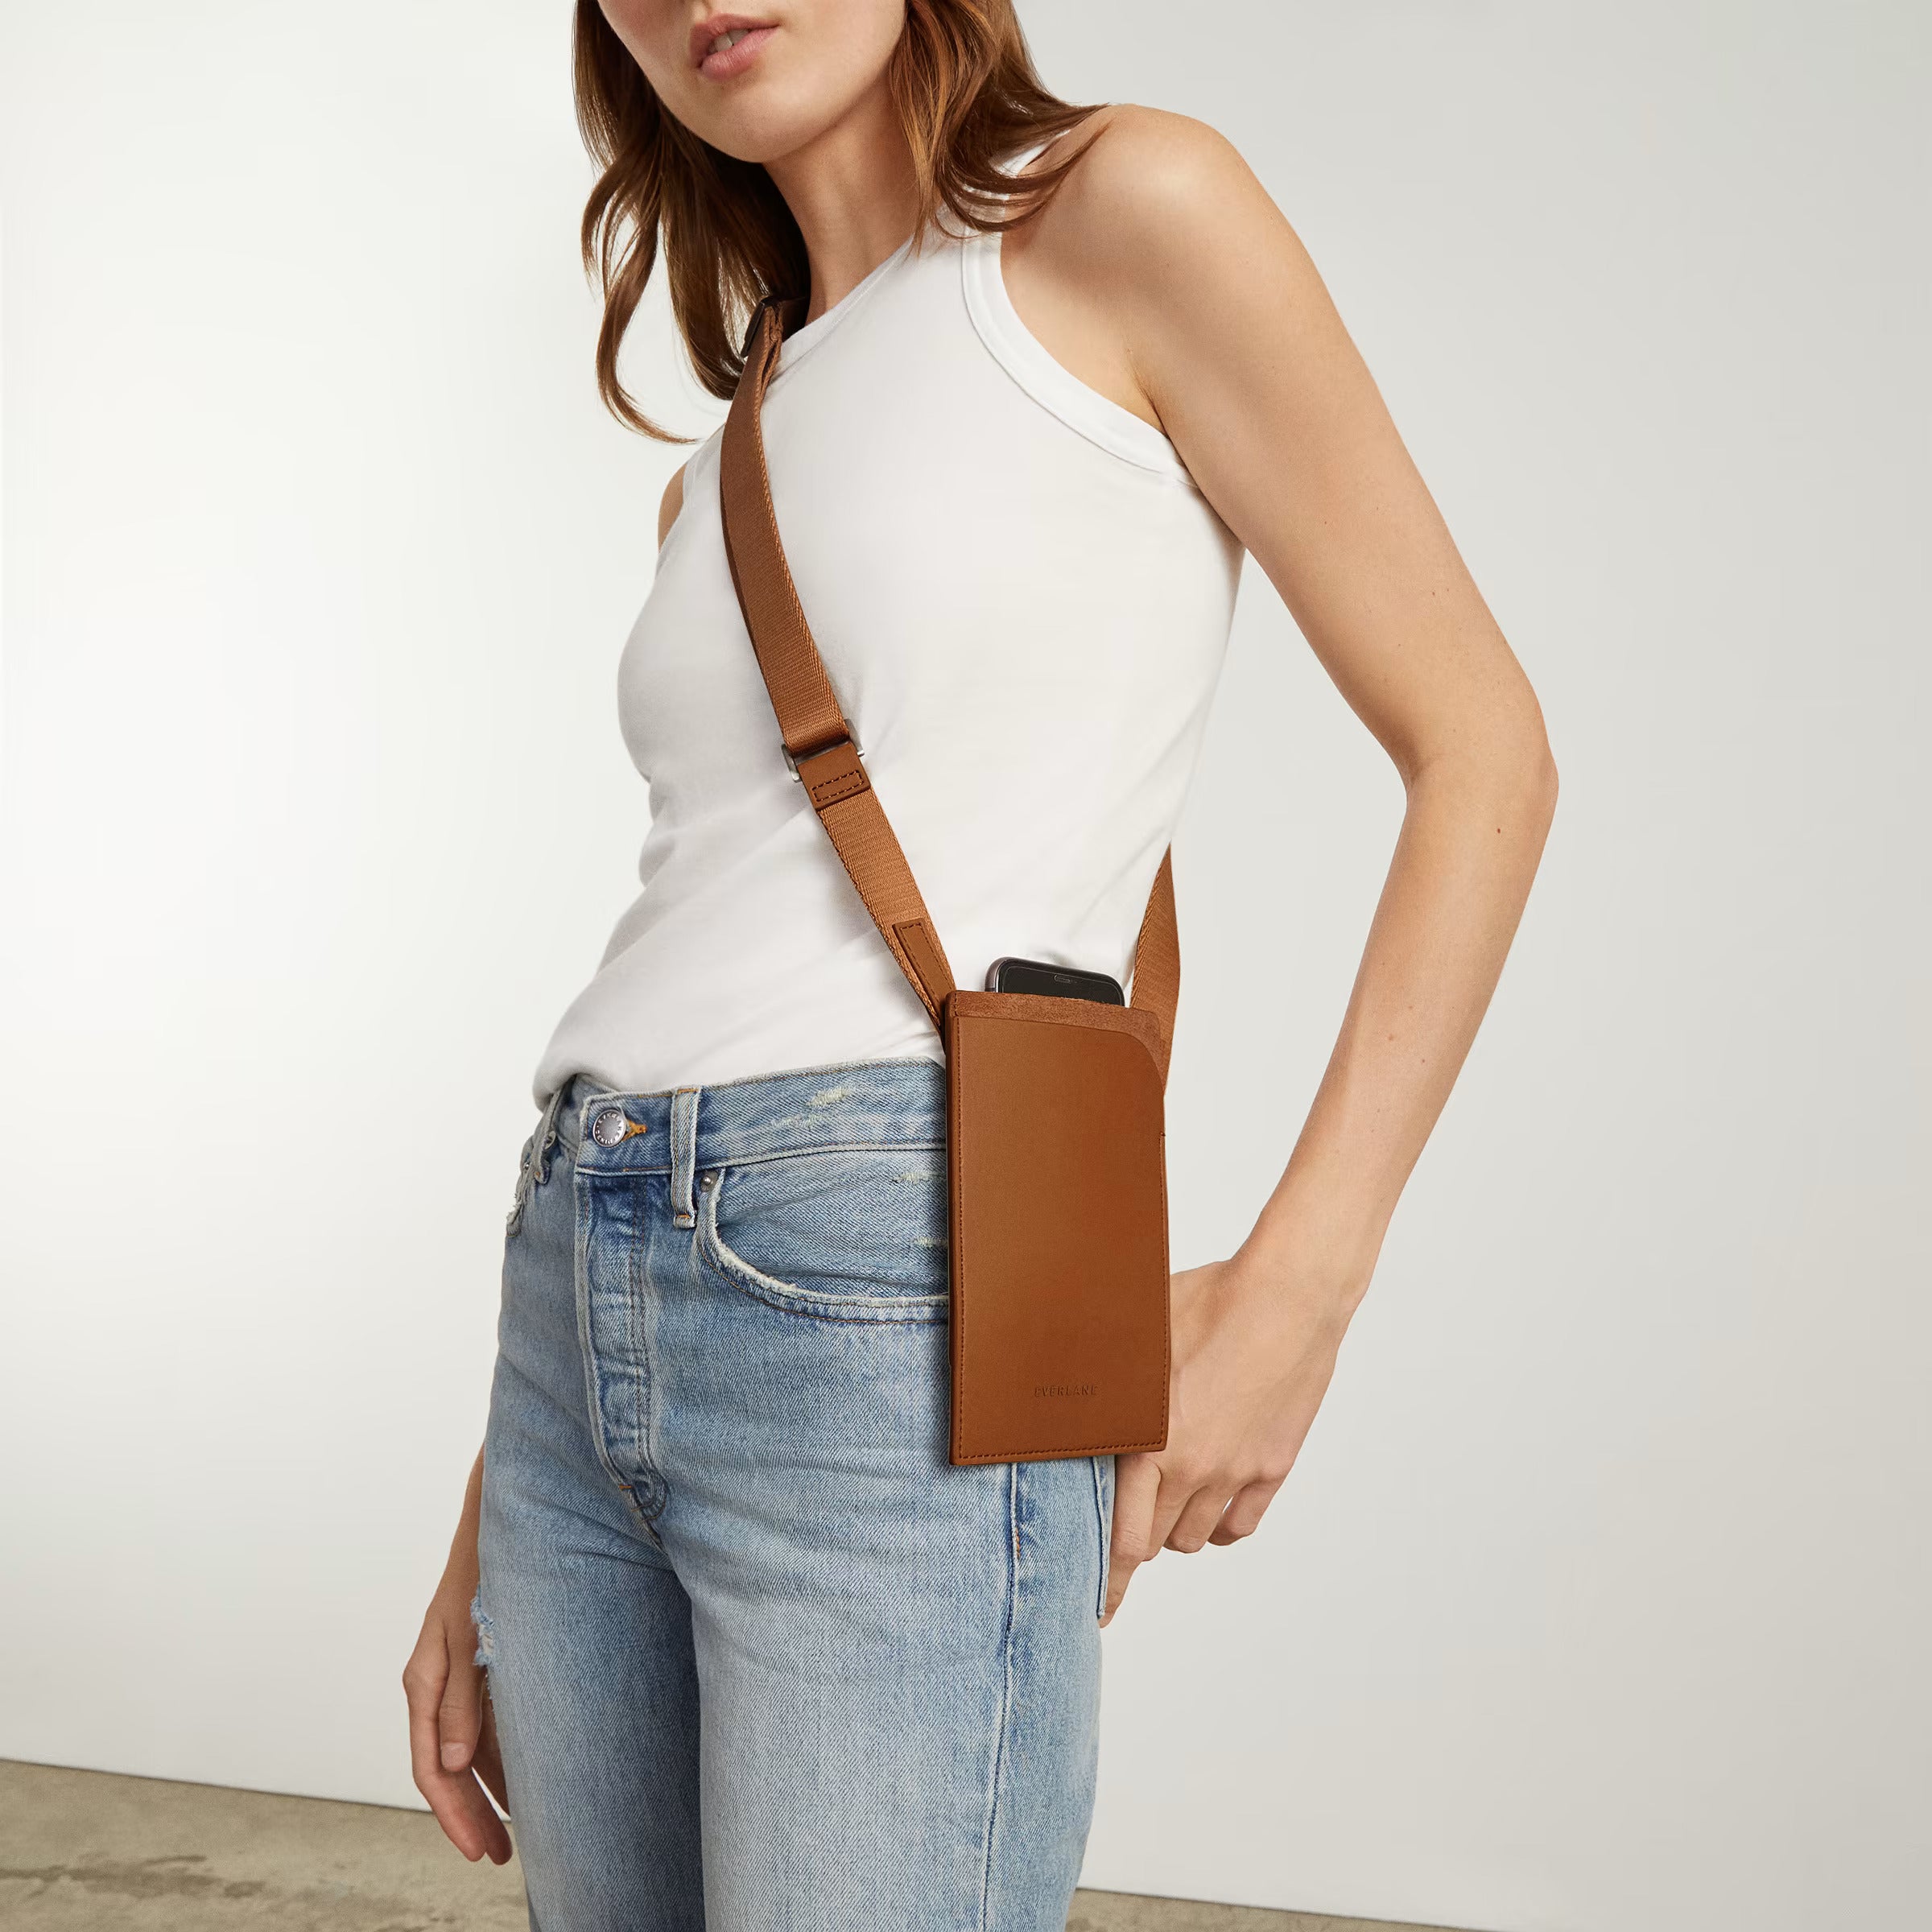 $30 Amazon Tote Bag Looks Just Like Madewell and Everlane Bags - Parade